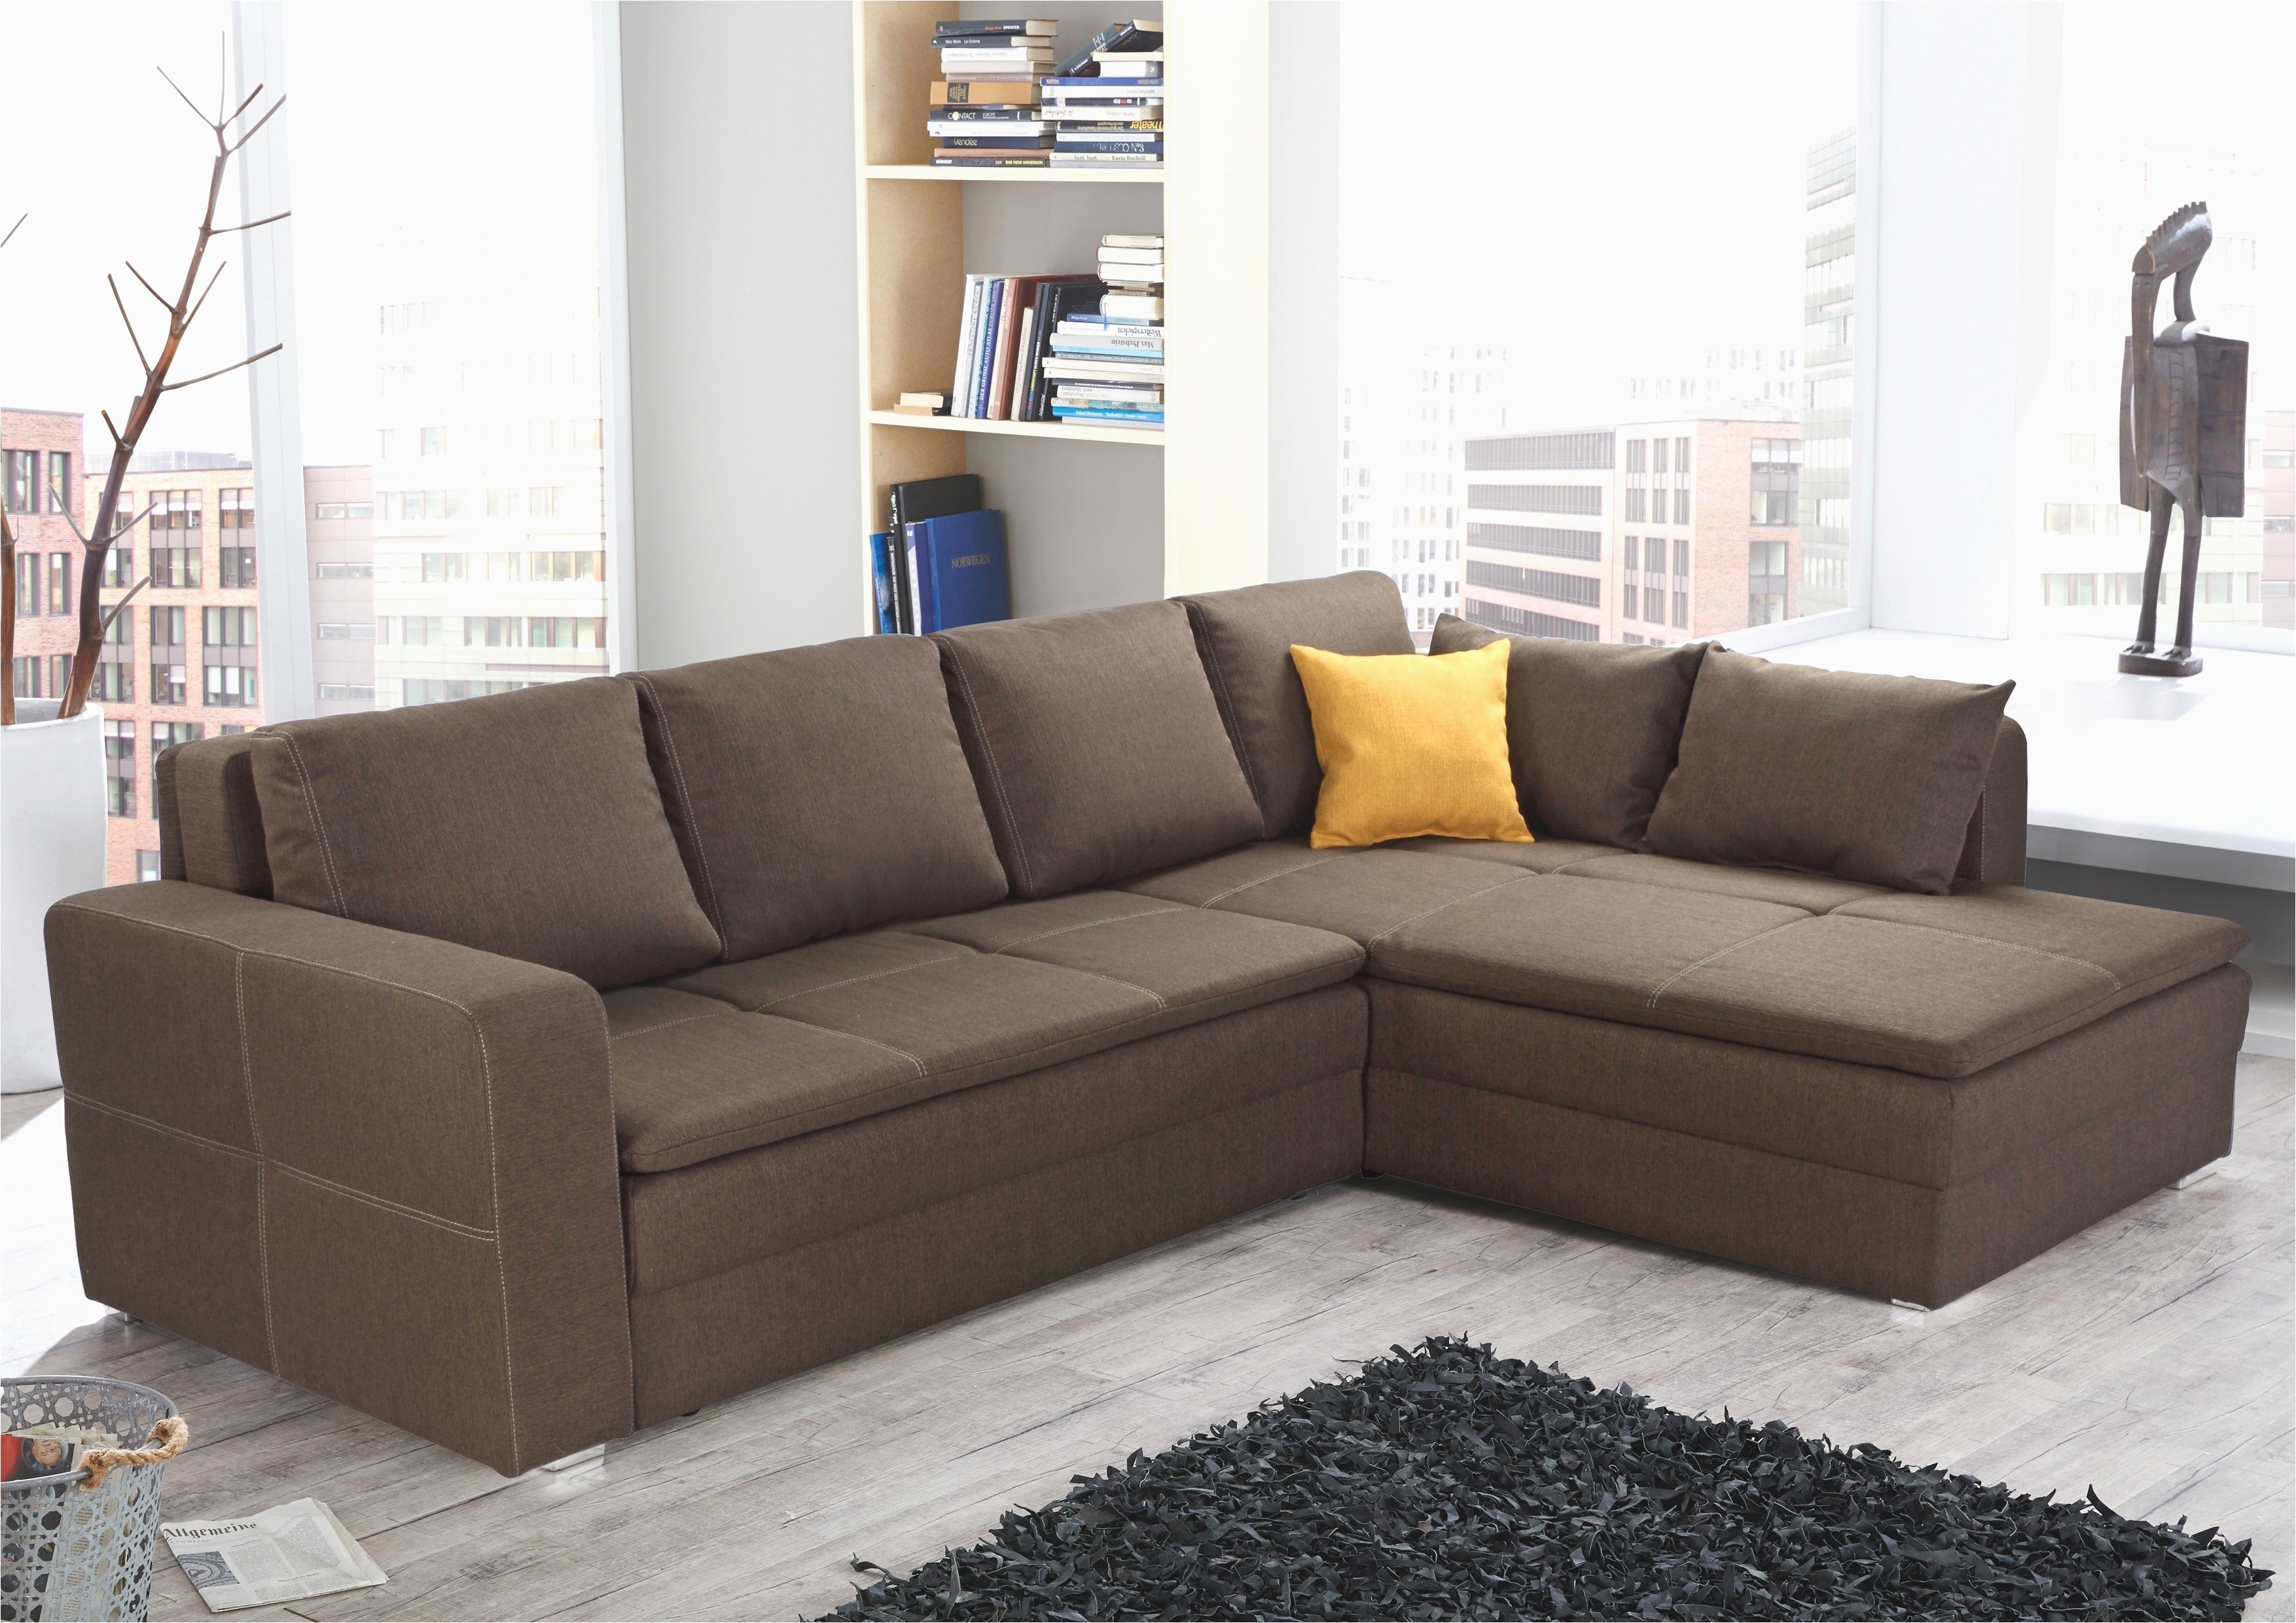 gunstige sofa macys furniture 0d archives modern house ideas and sectional sofa with sleeper bed for